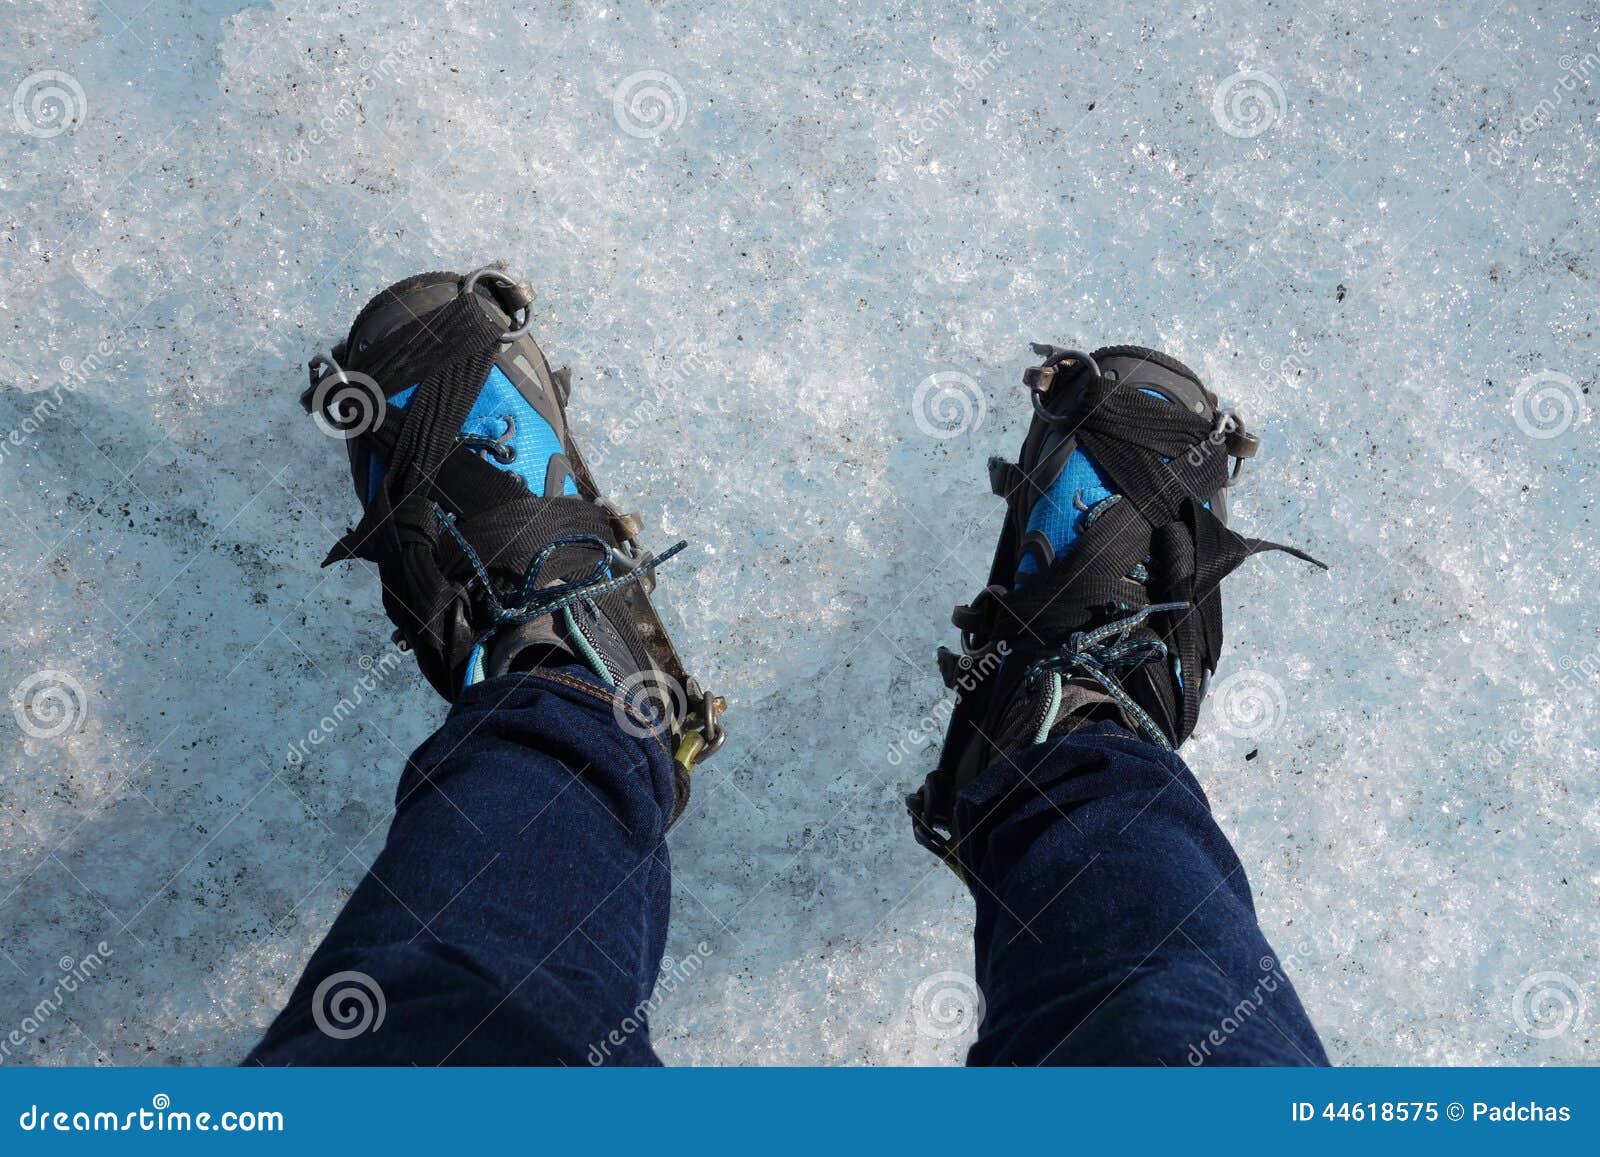 hiking boots with crampon on ice